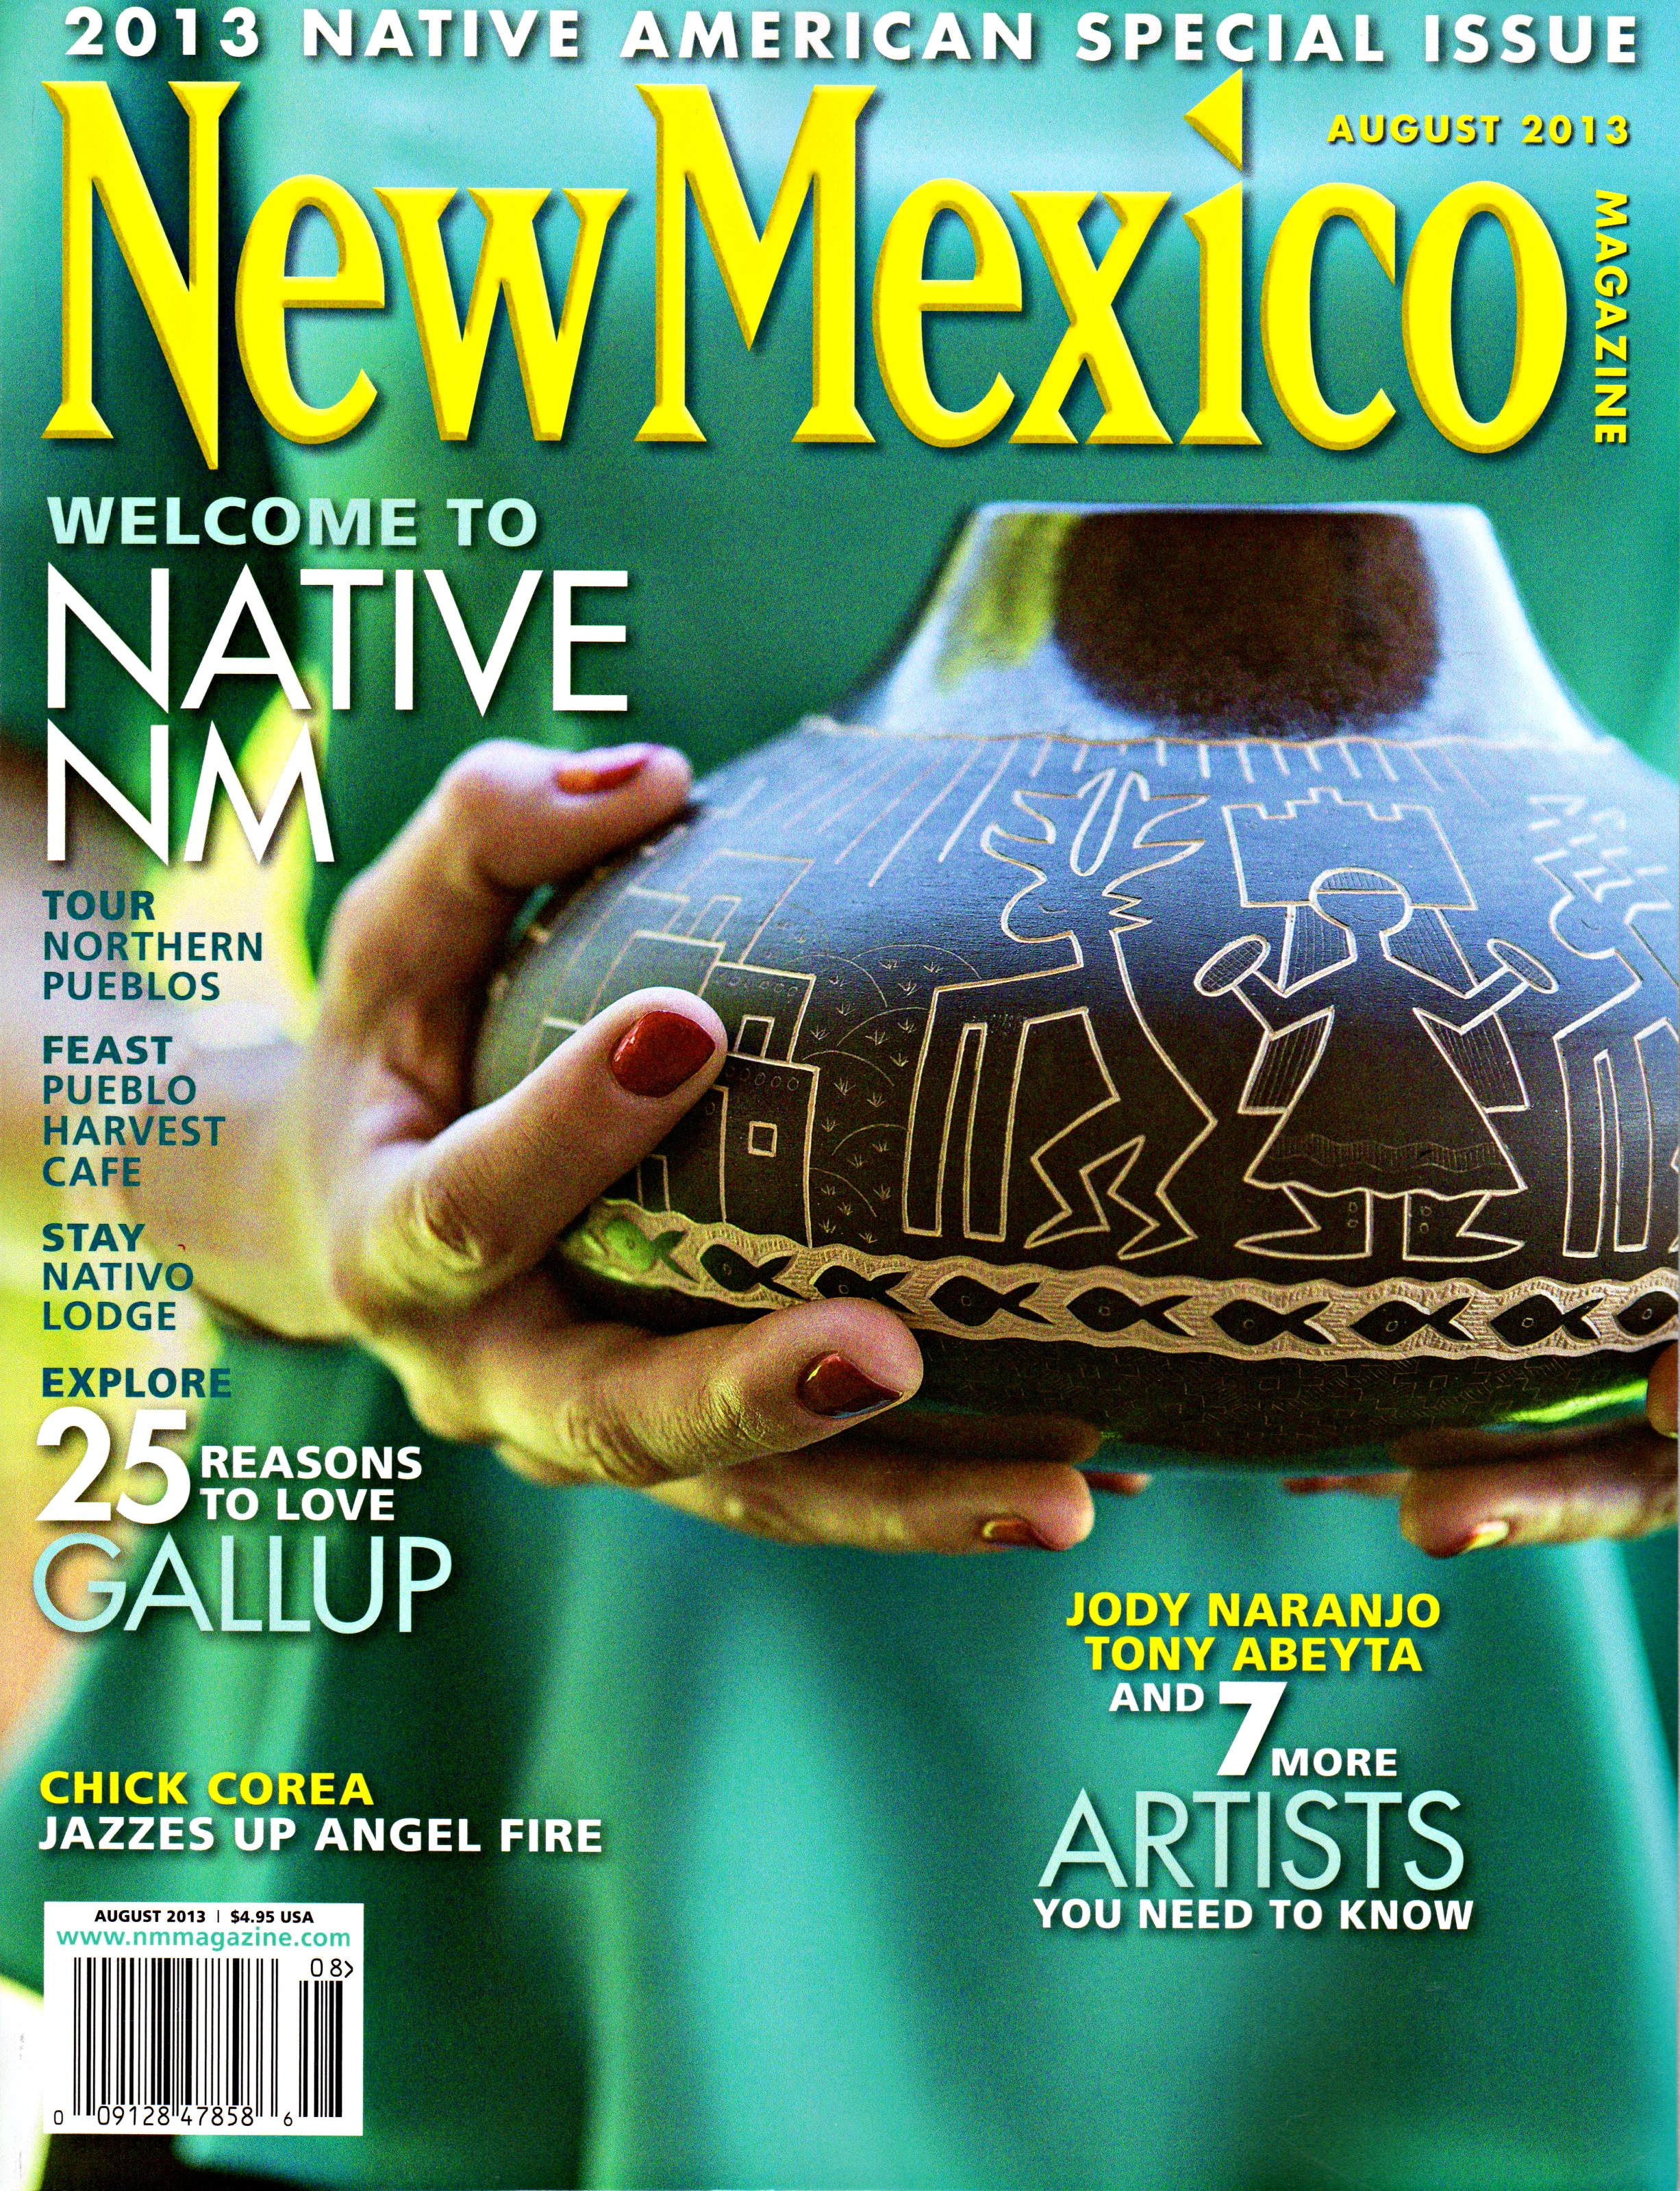 New Mexico Magazine August 2013 Cover.jpg